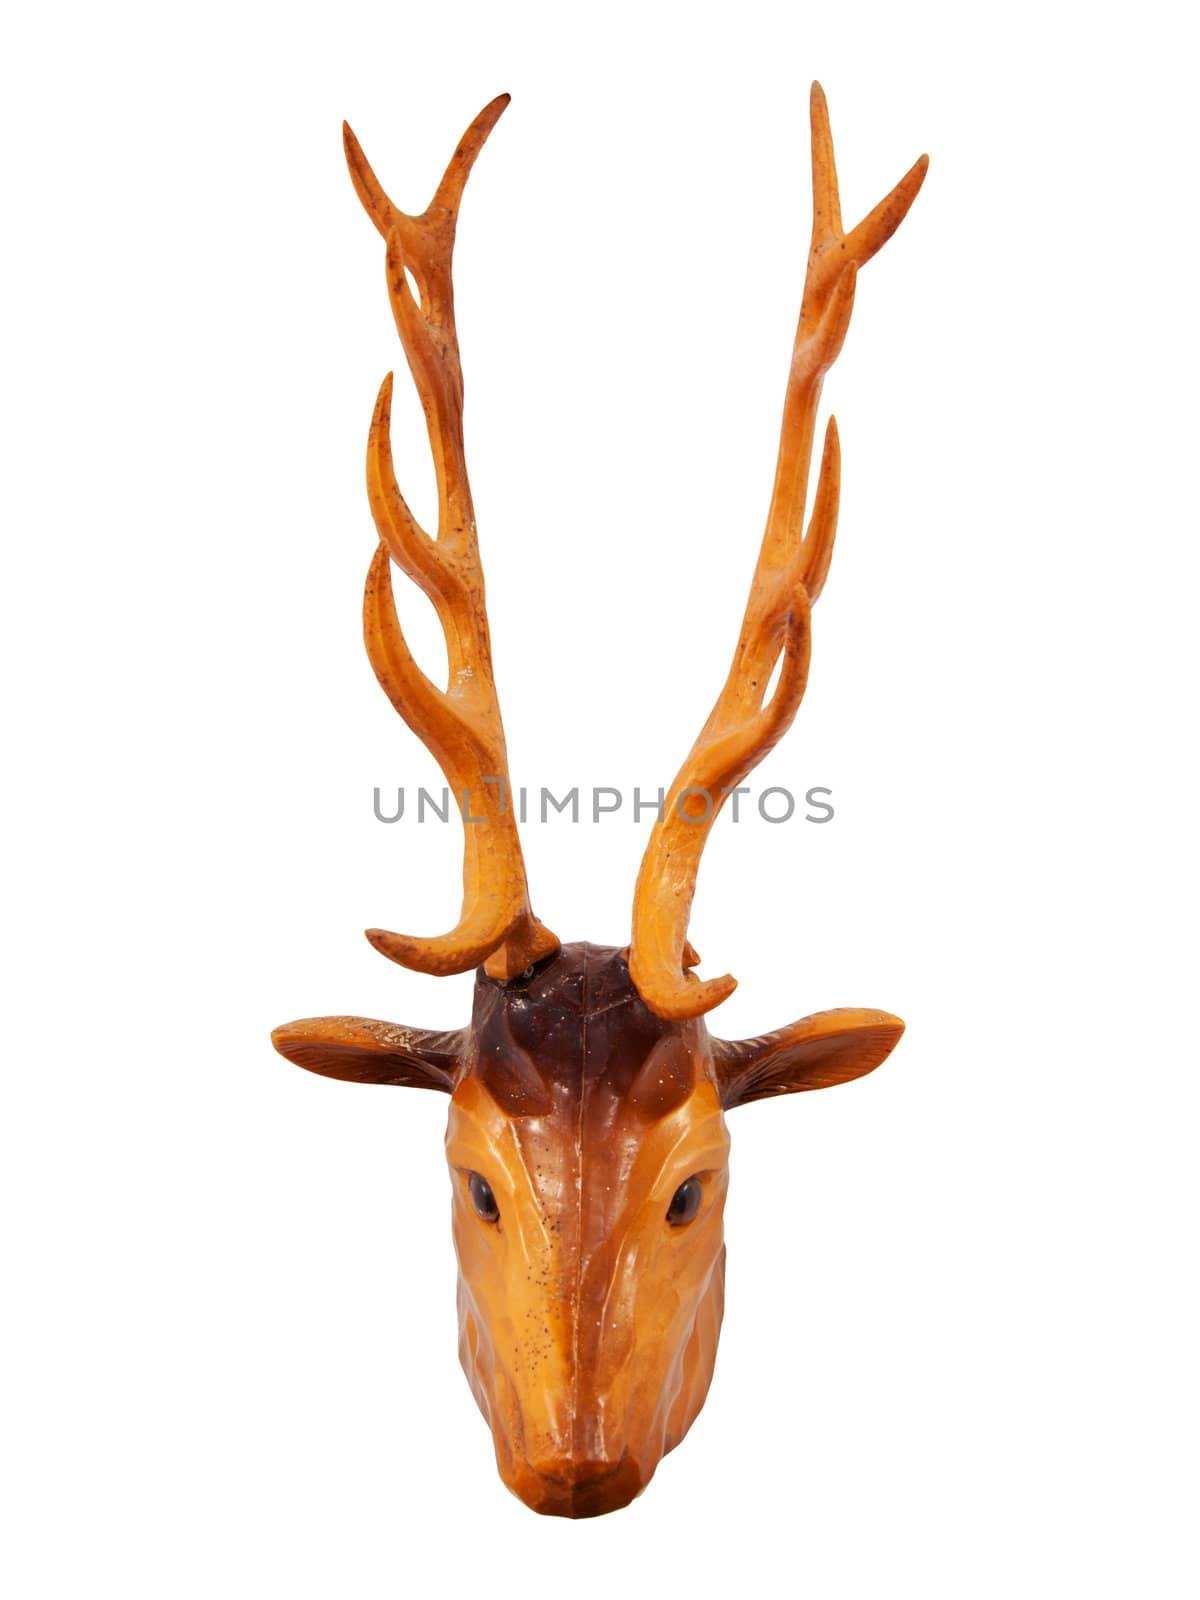 The deer wood vintage object on white background